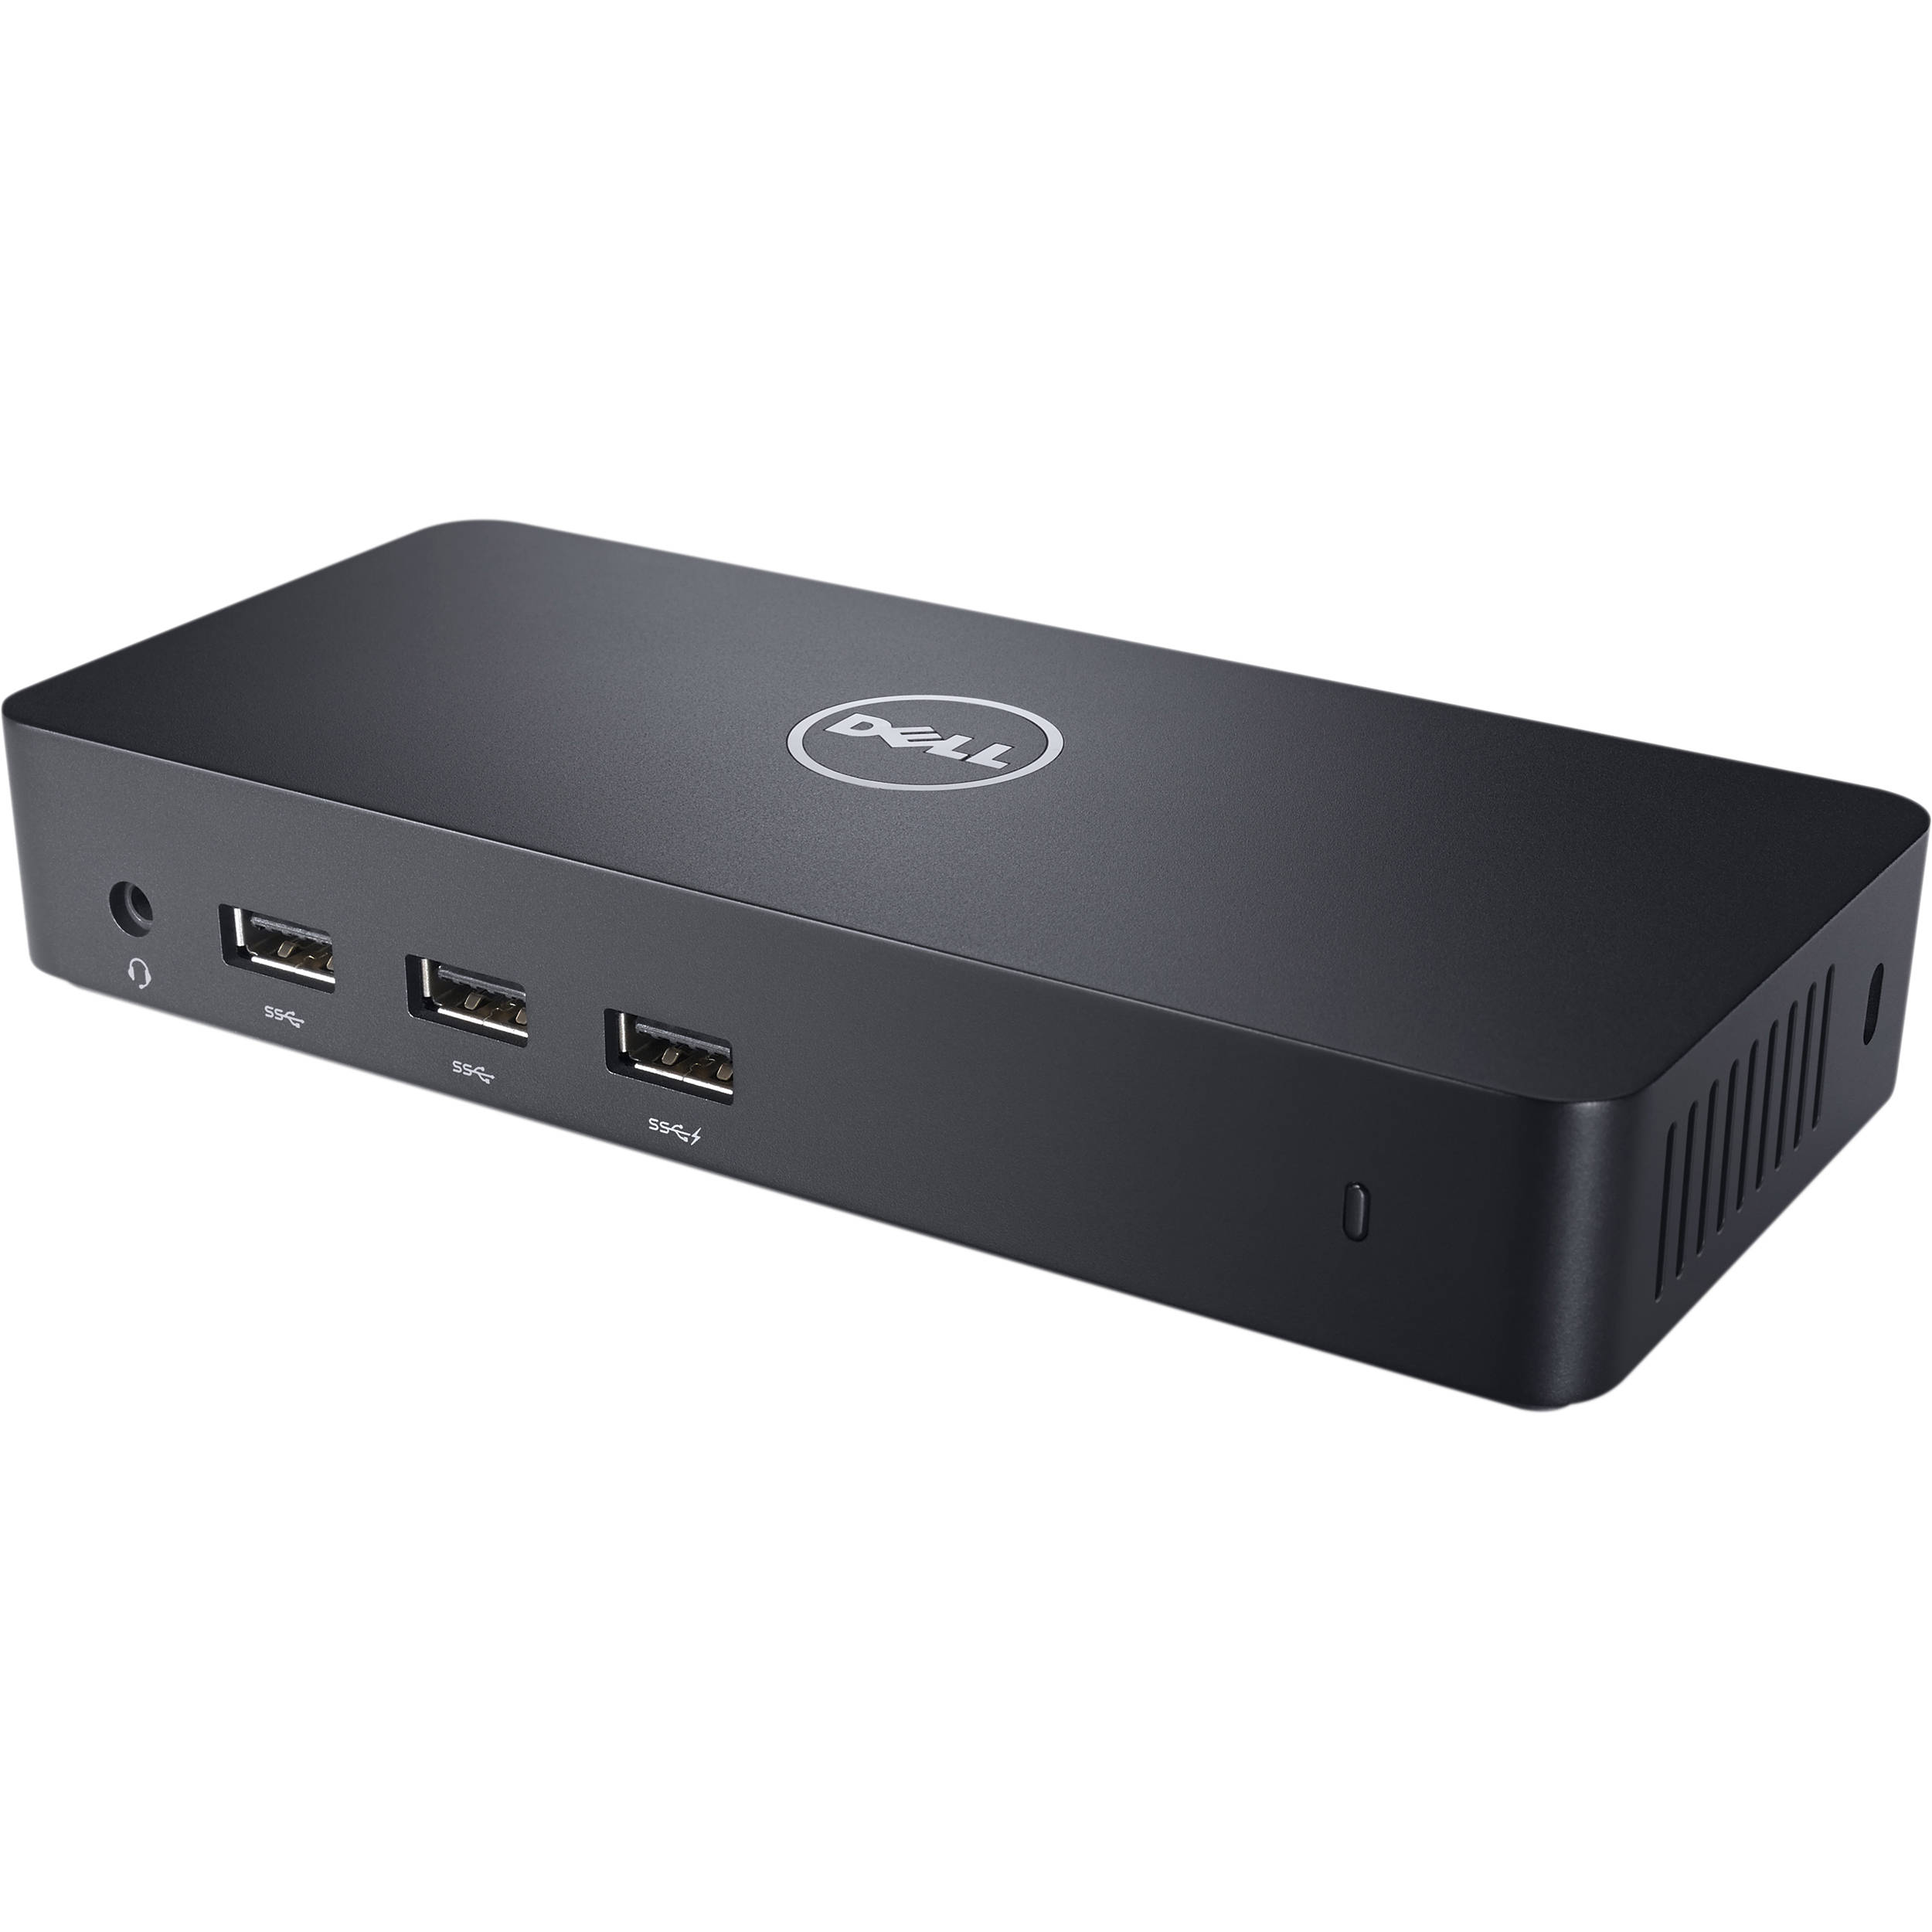 Sending Sound Through Dell Docking Station: Tips And Tricks